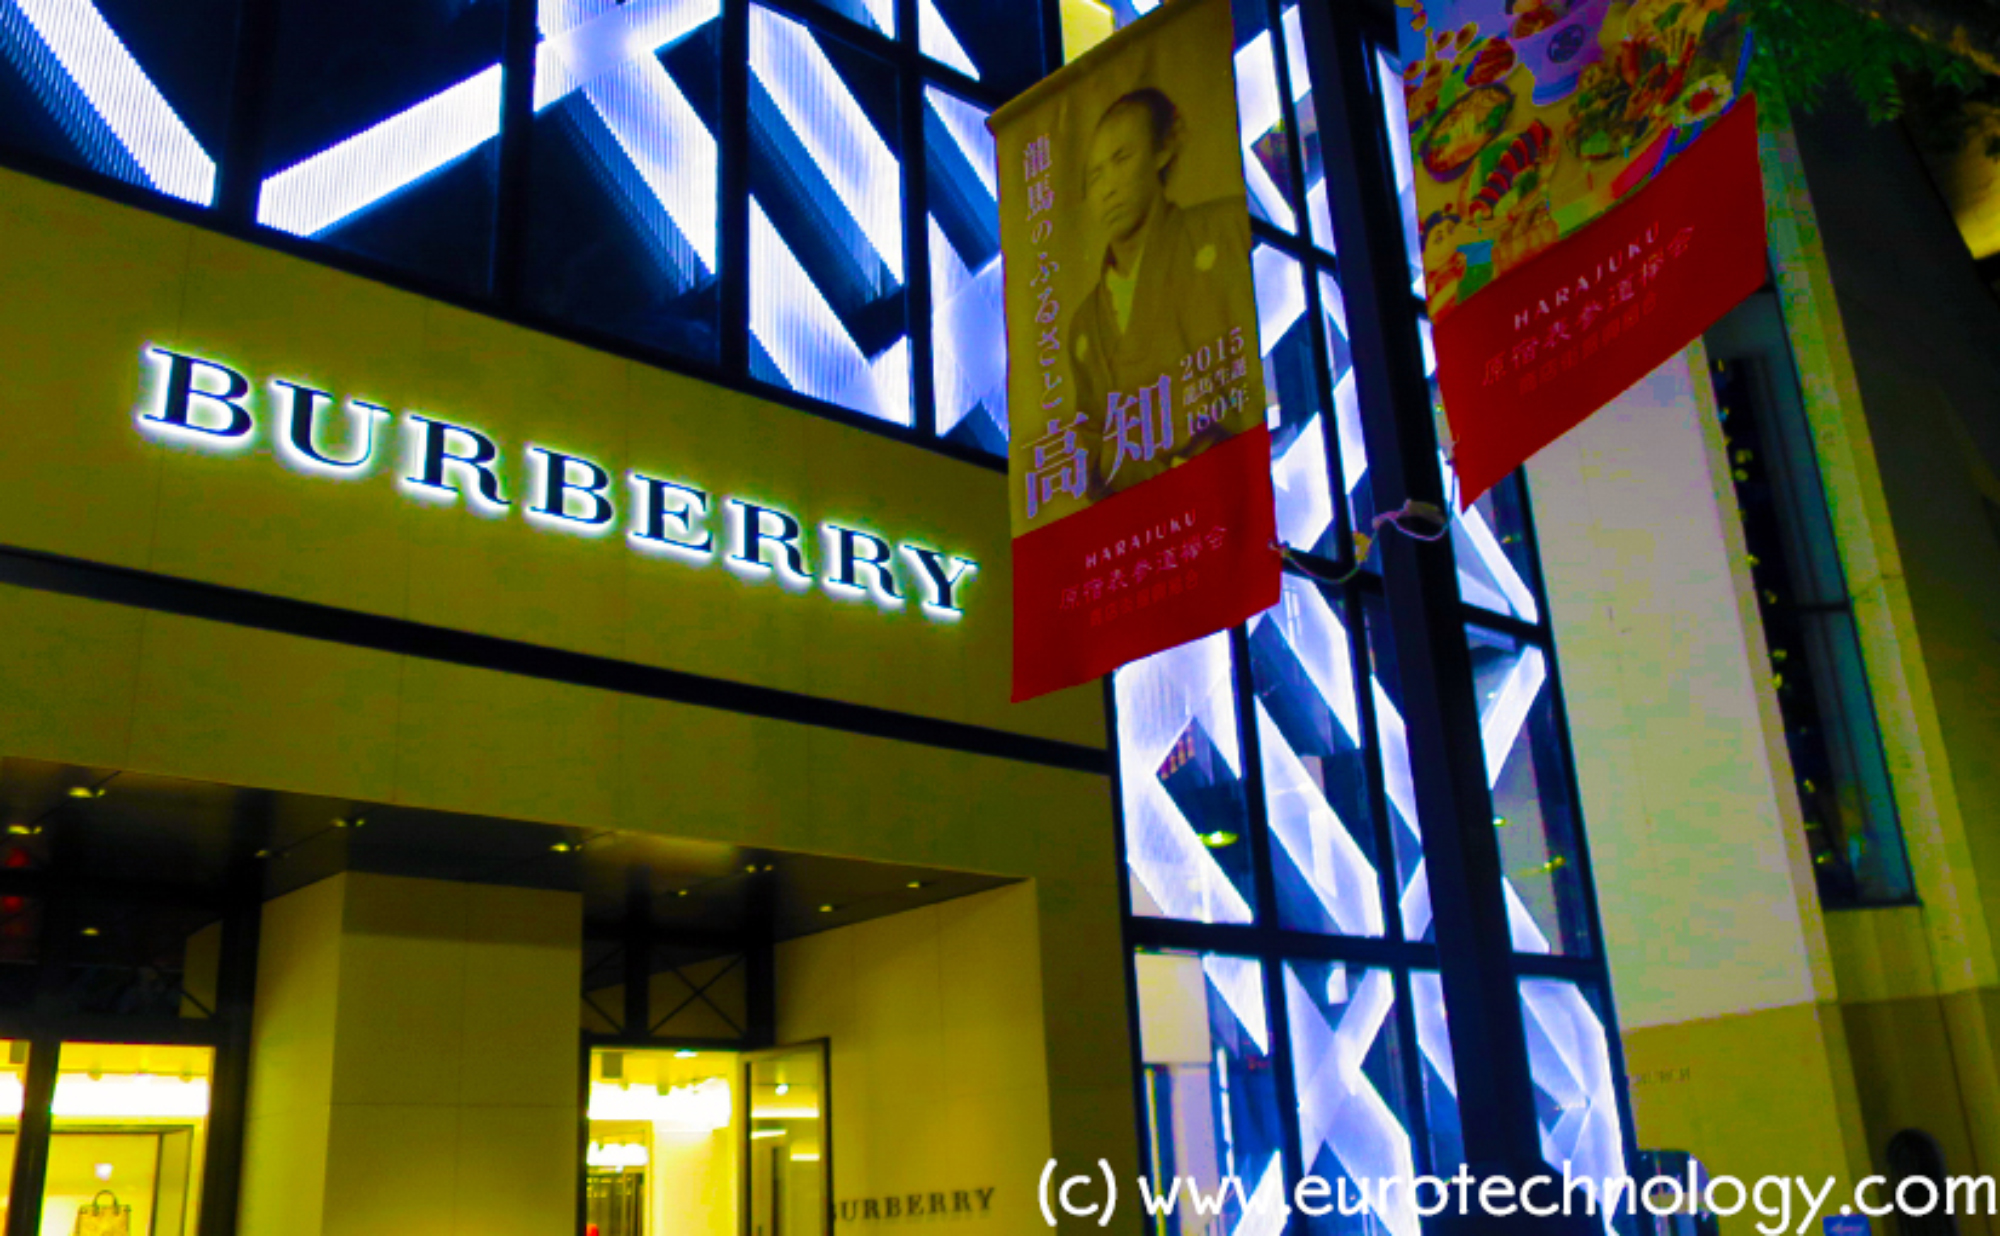 Burberry Japan moves from licensing to direct model